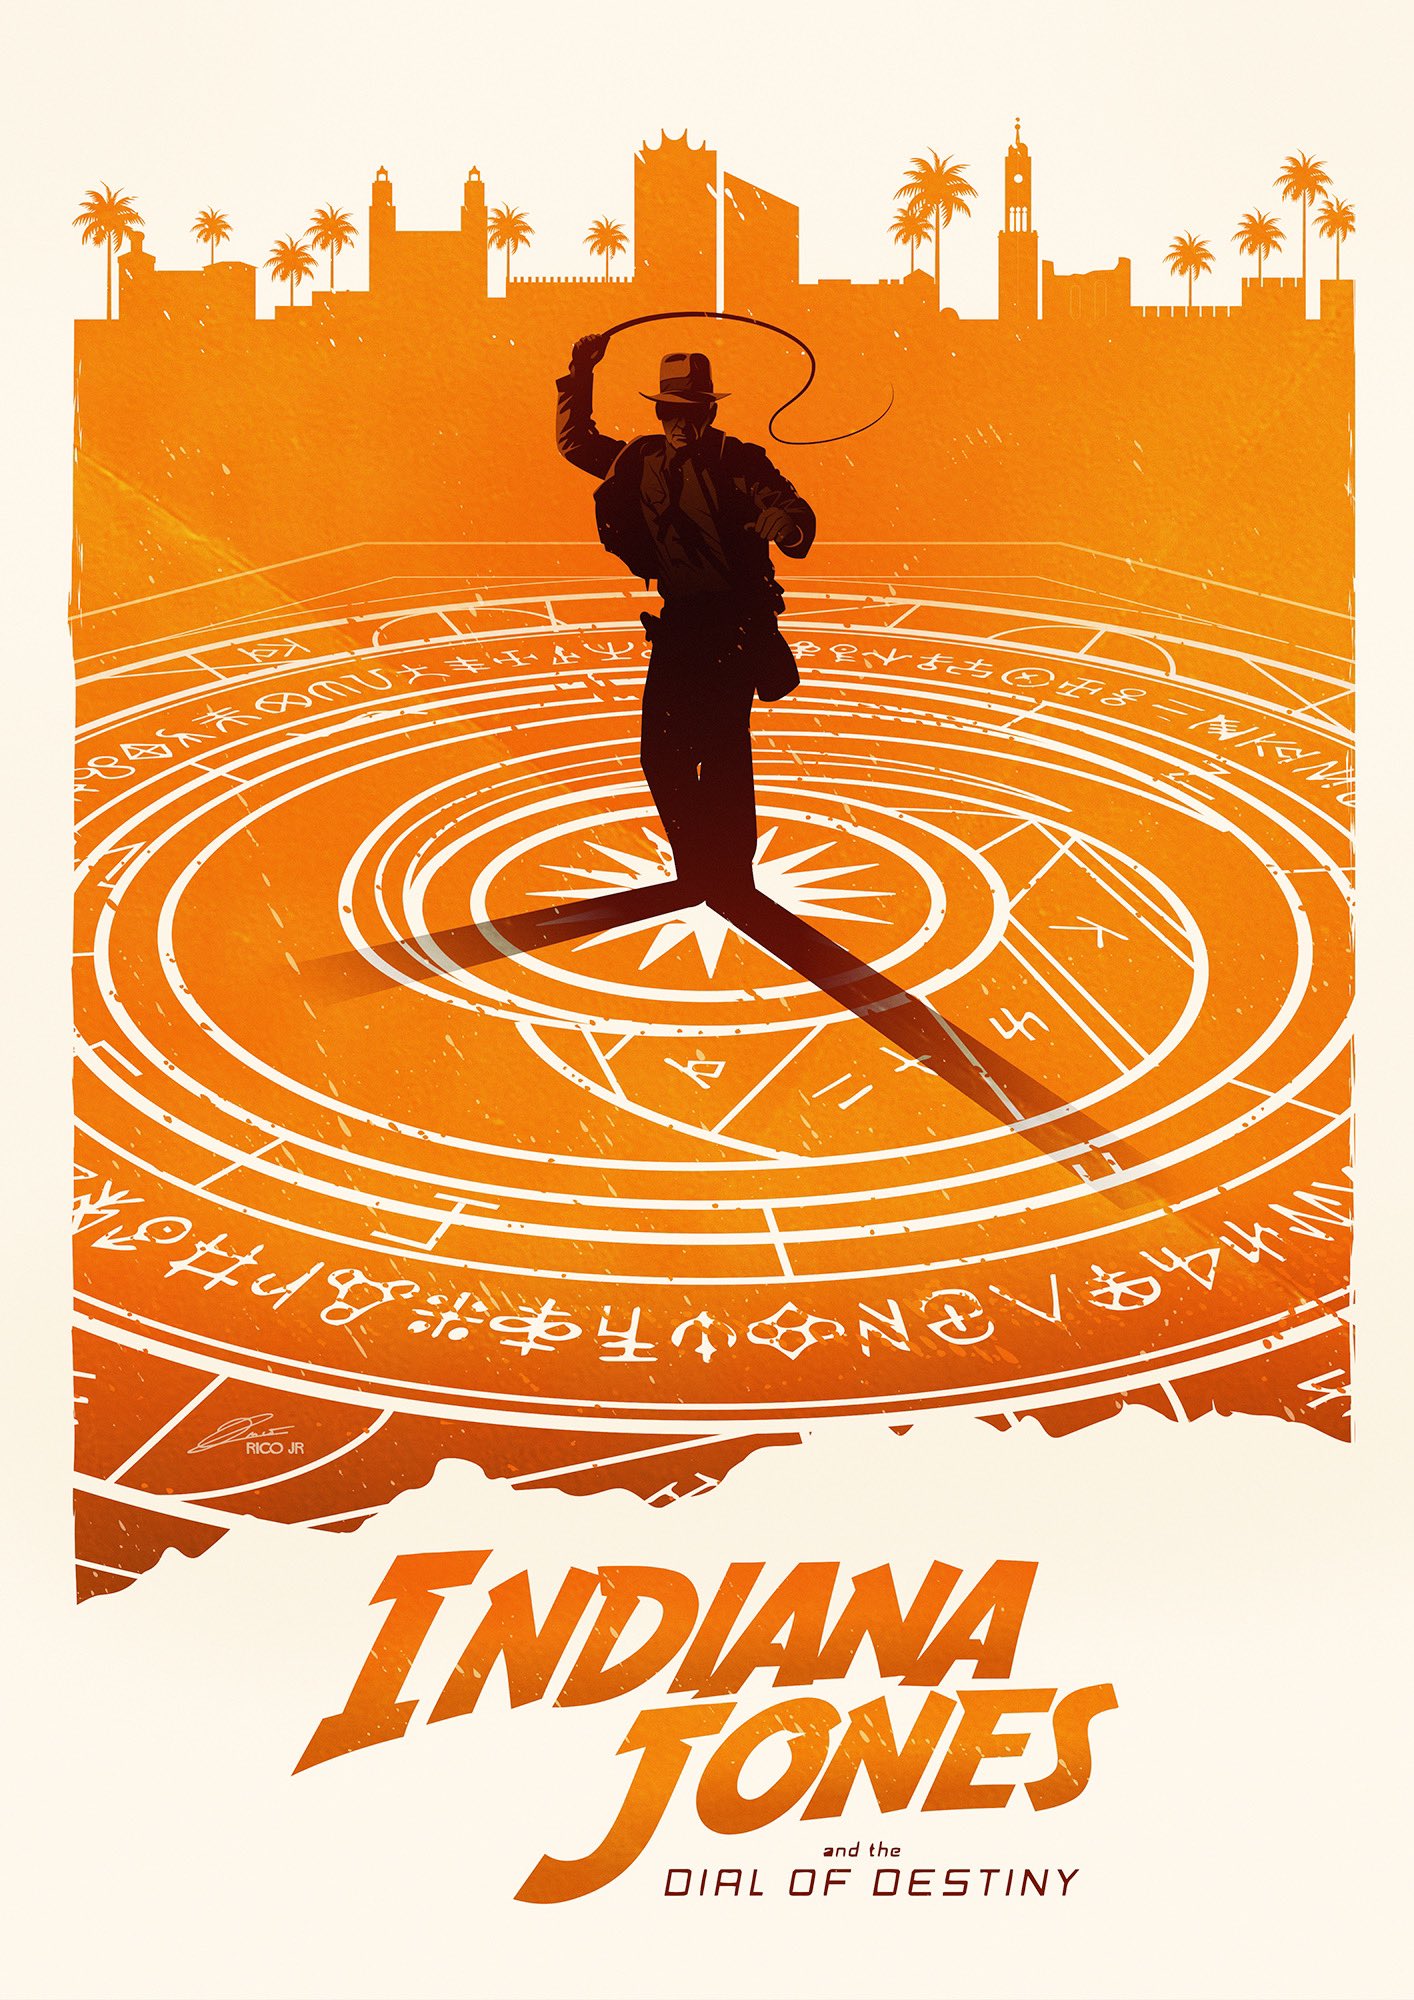 Creatieve Indiana Jones and the Dial of Destiny posters